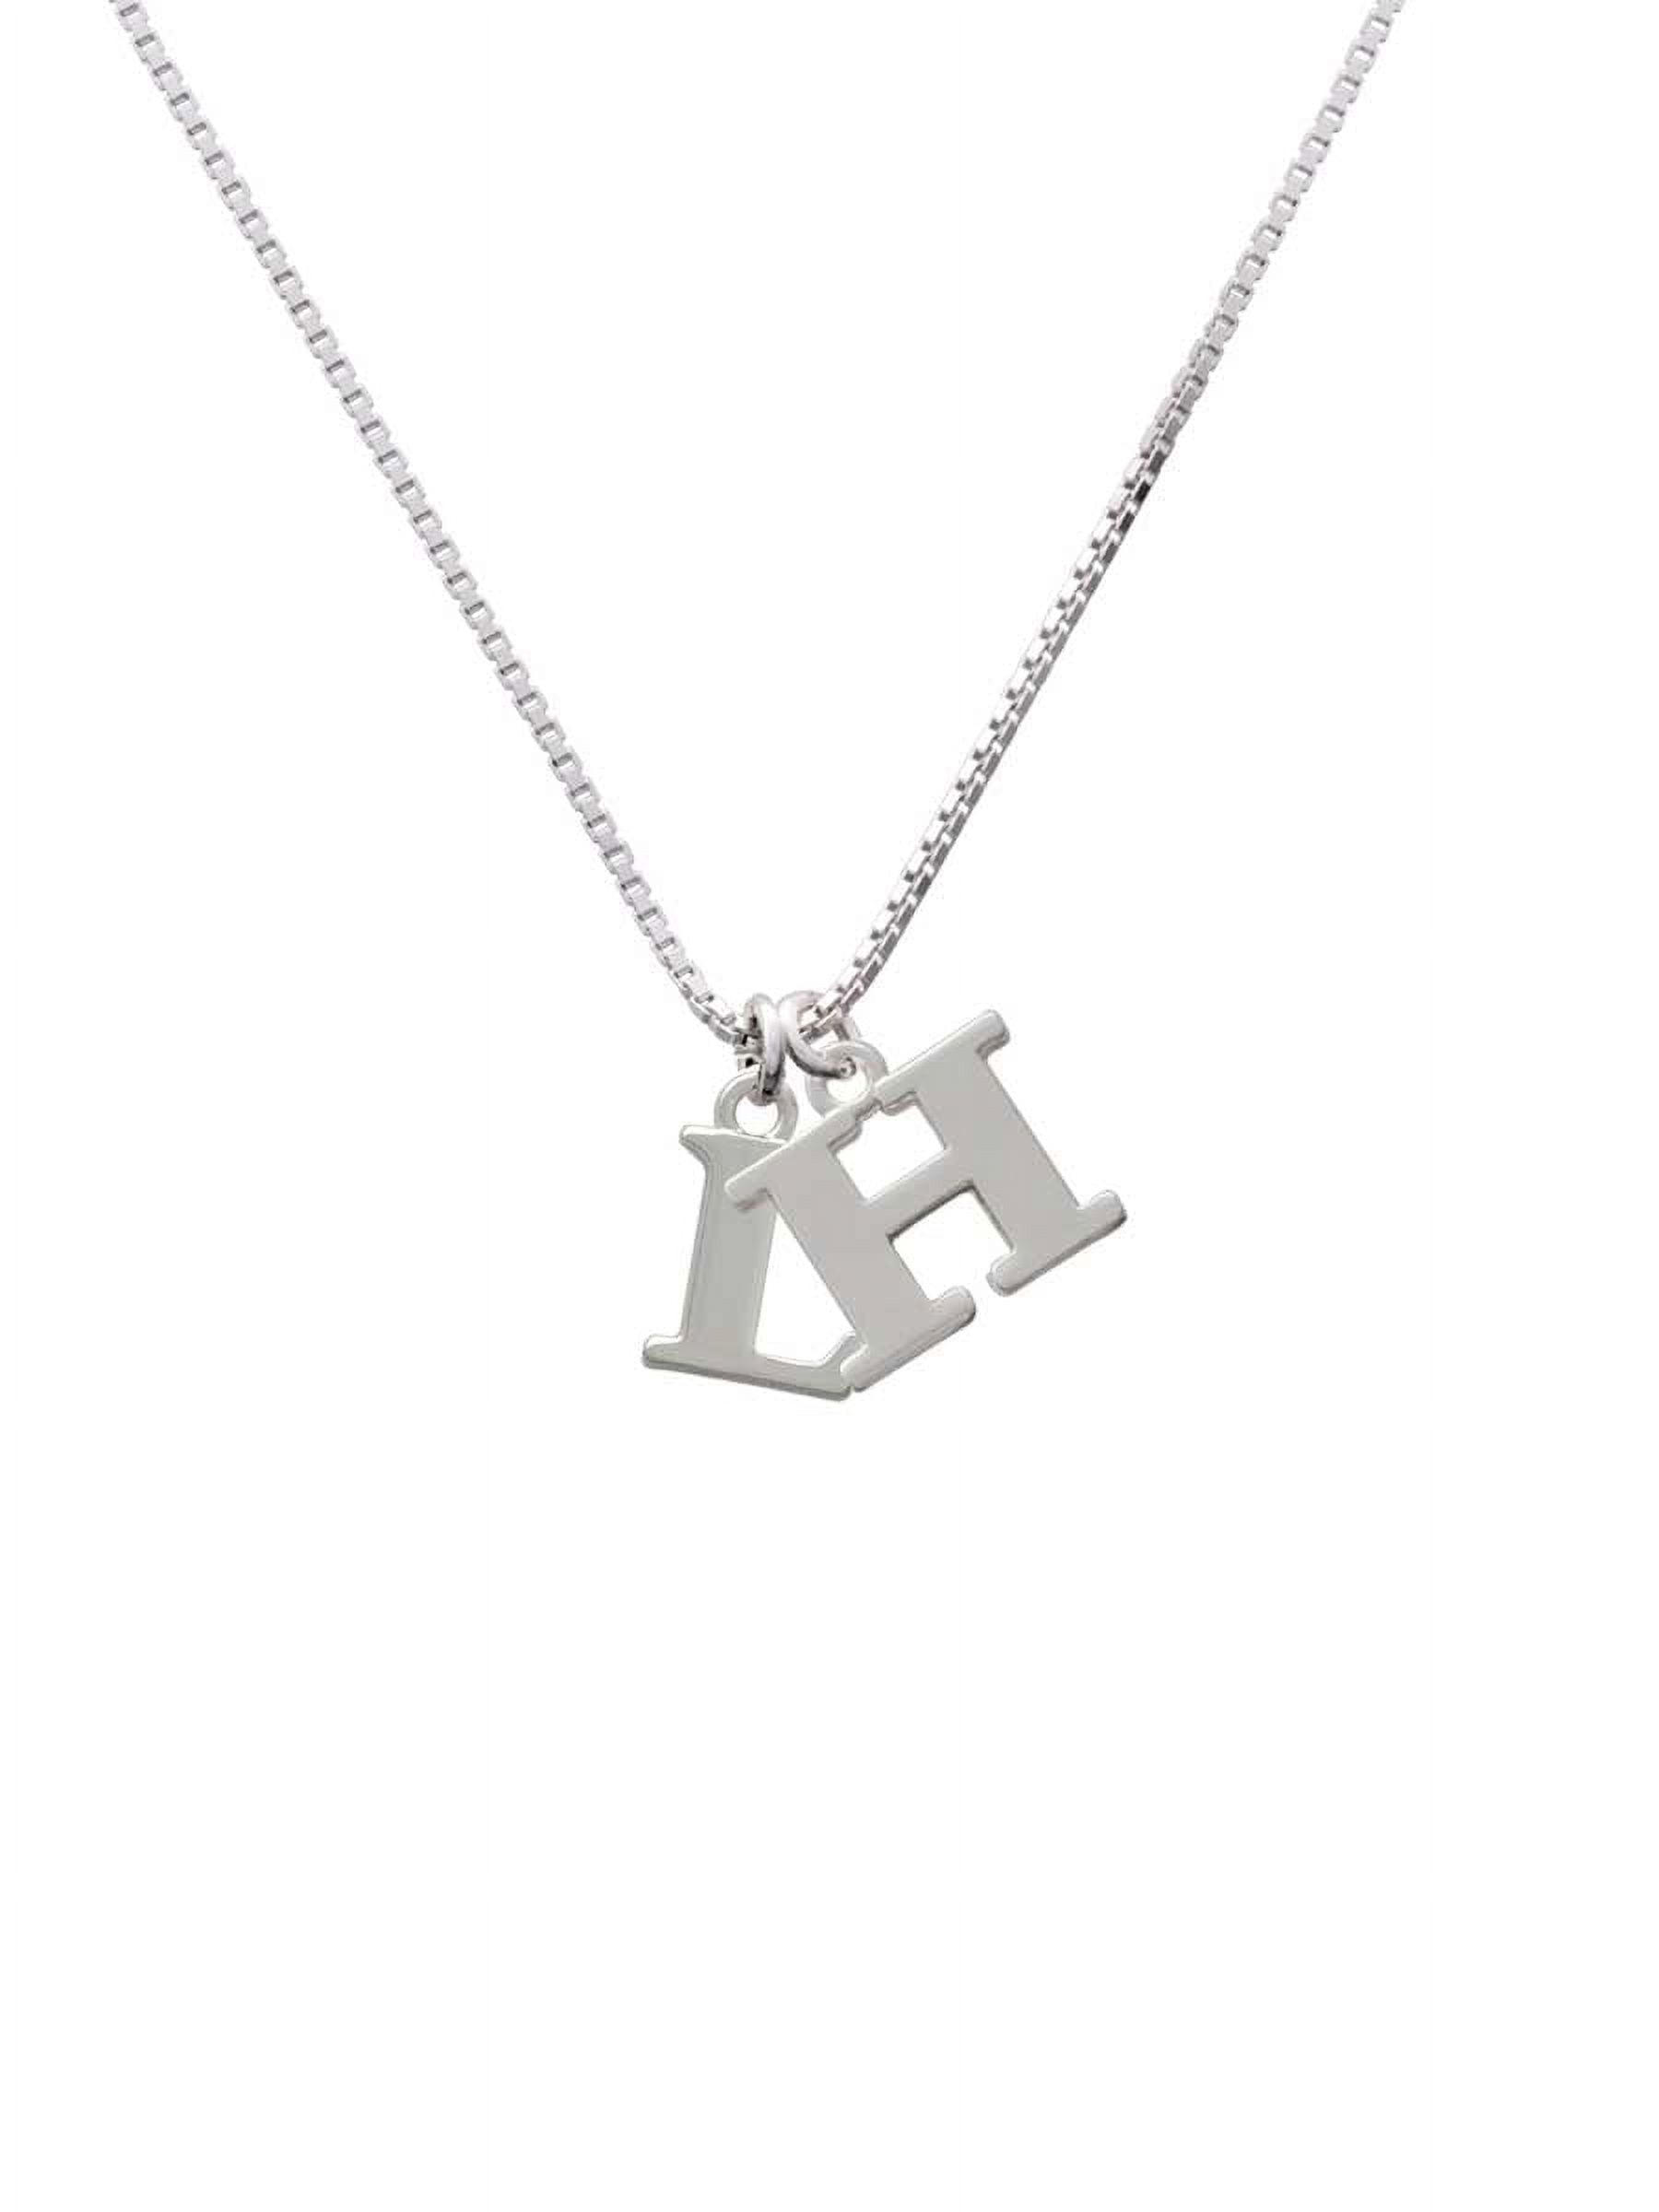 Silvertone Large Initial L H Initial Necklace c3d73667 9999 4ba6 abb5 a8b3c7374e36.5be682f6fc8c453cde0fb0b9f1d686eb